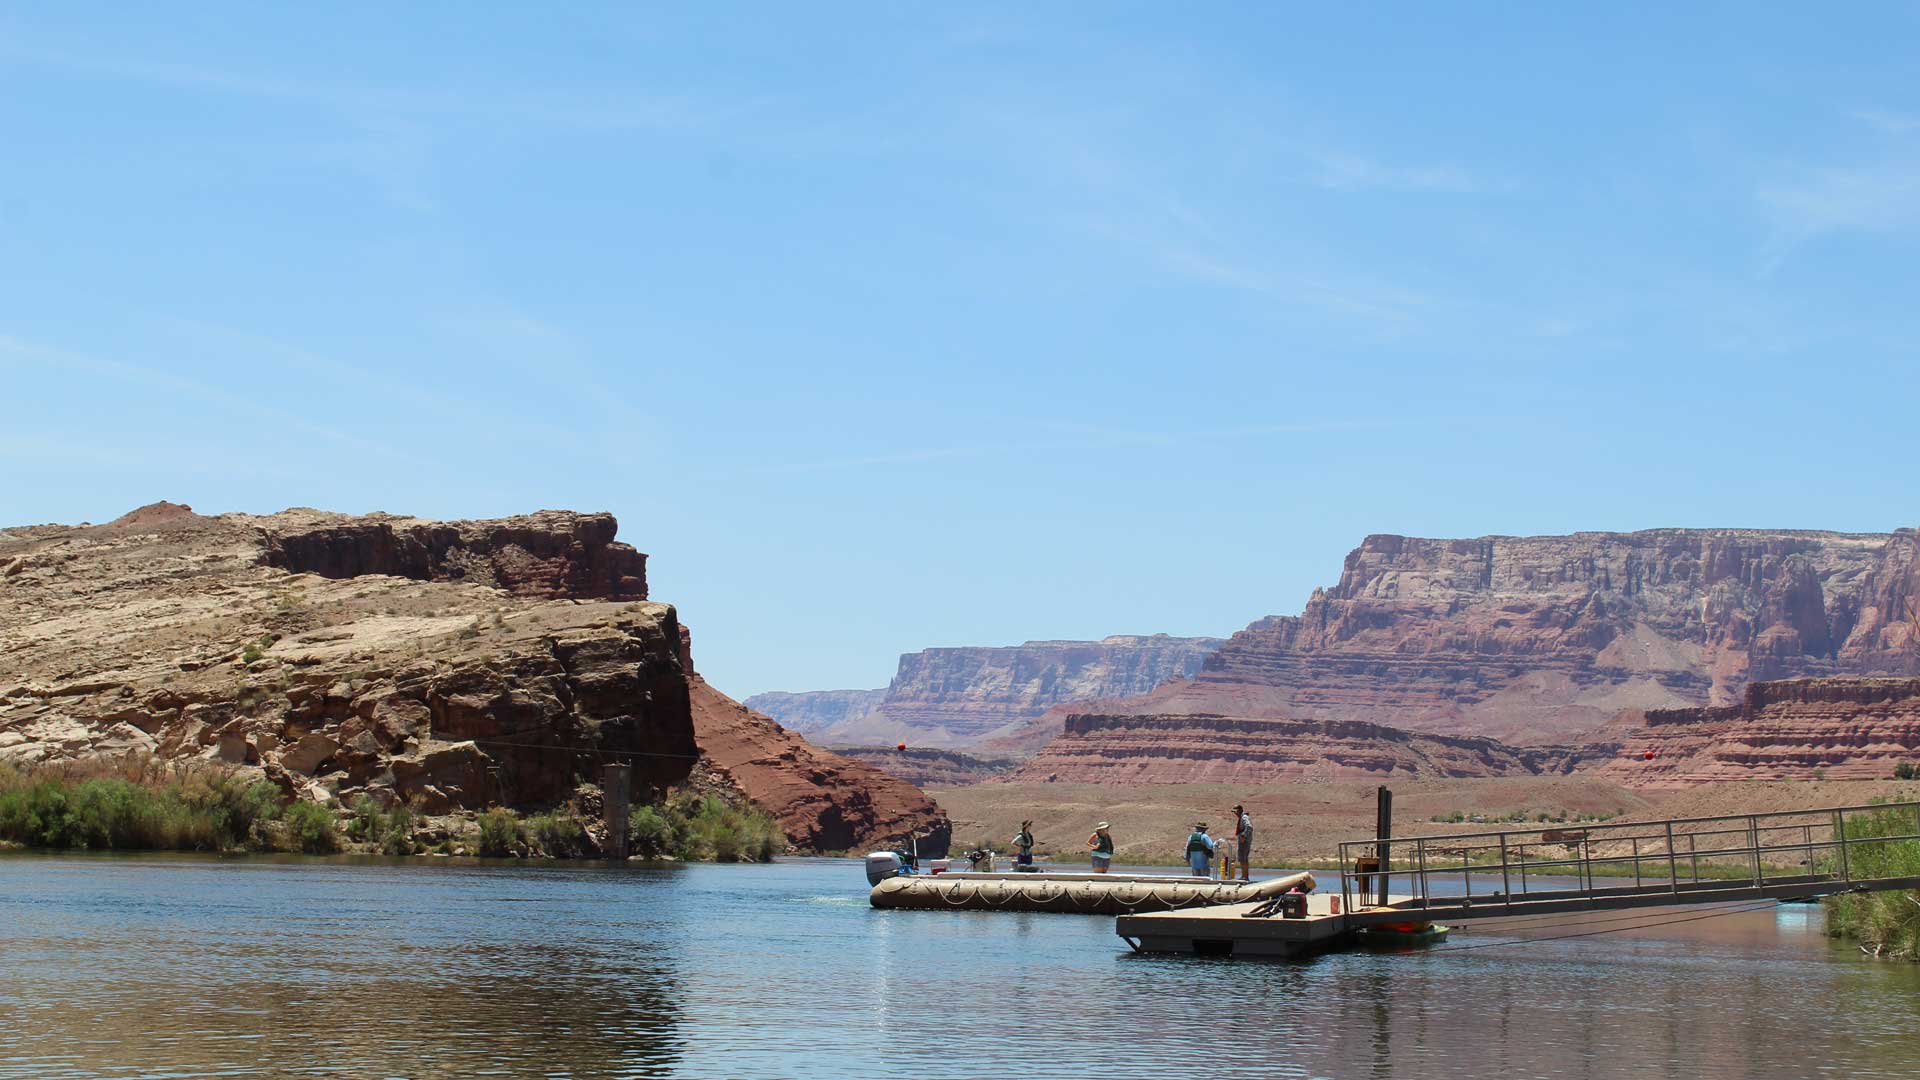 Lee's Ferry, pictured here, serves as the point where negotiators of the Colorado River Compact divided the river into two basins. 
